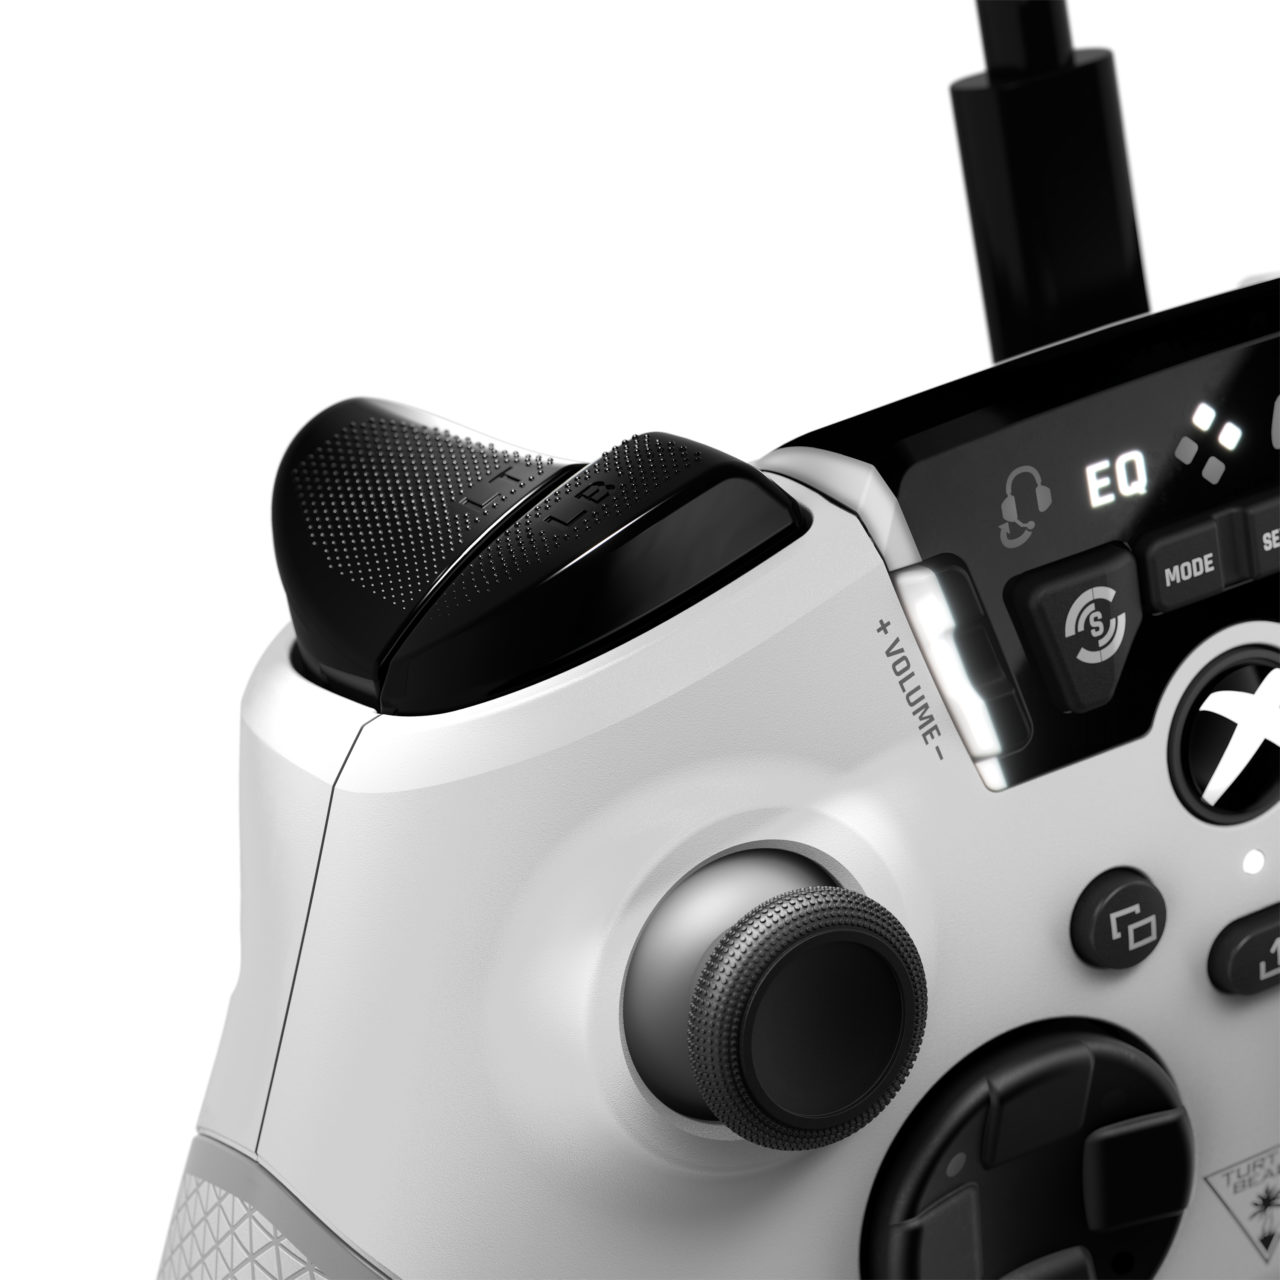 Recon Controller product image (Turtle Beach)